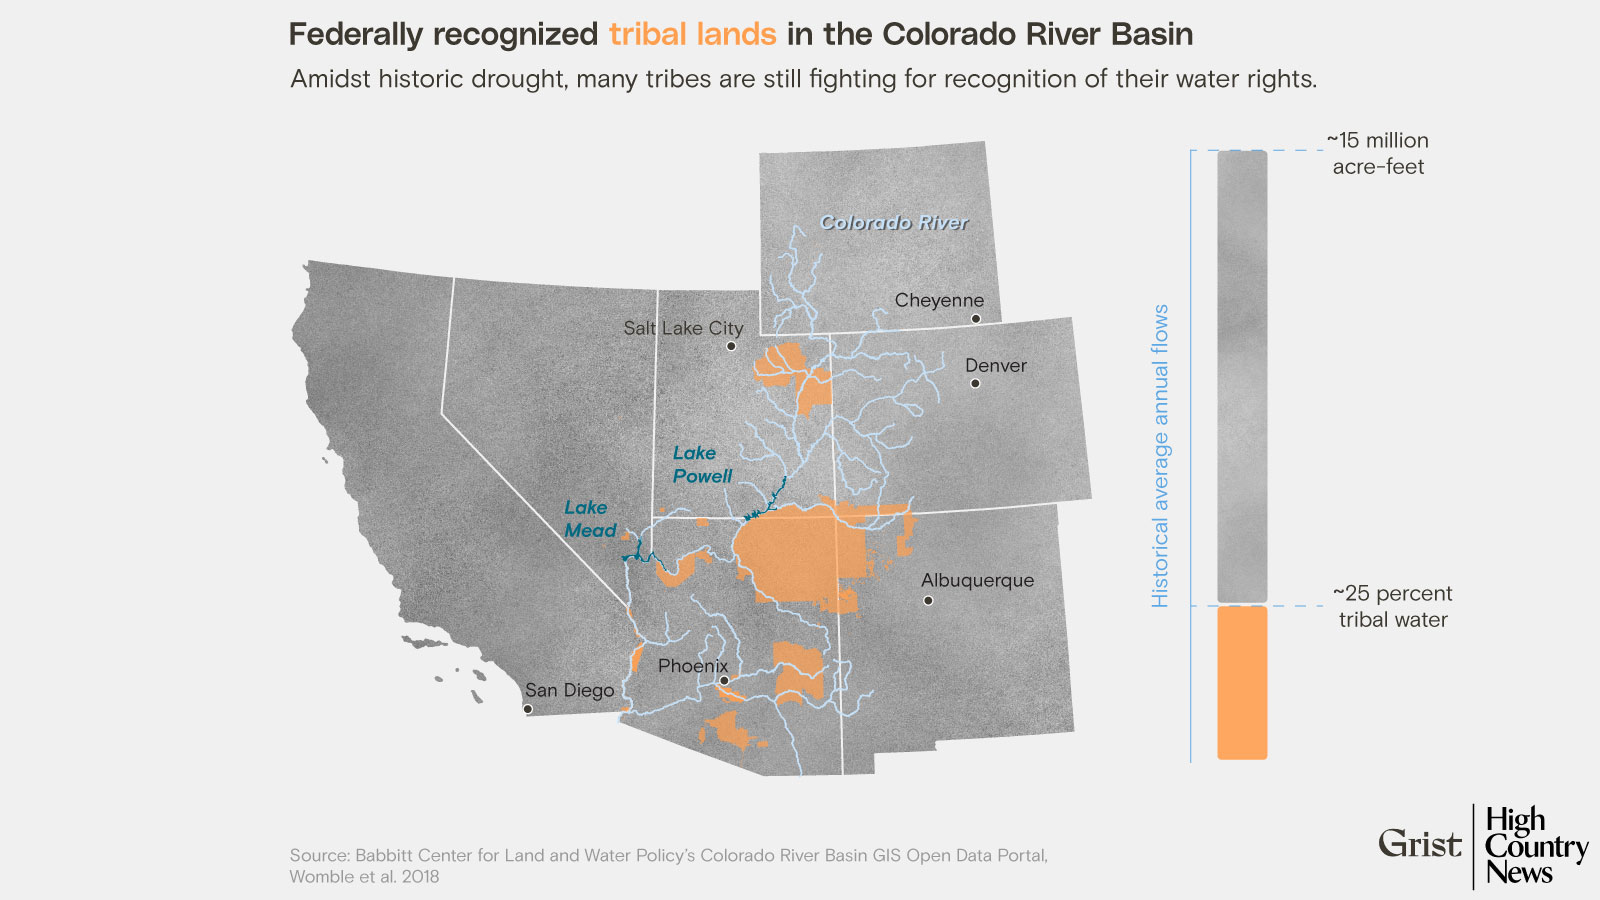 Map showing federally recognized tribal lands in the Colorado River Basin